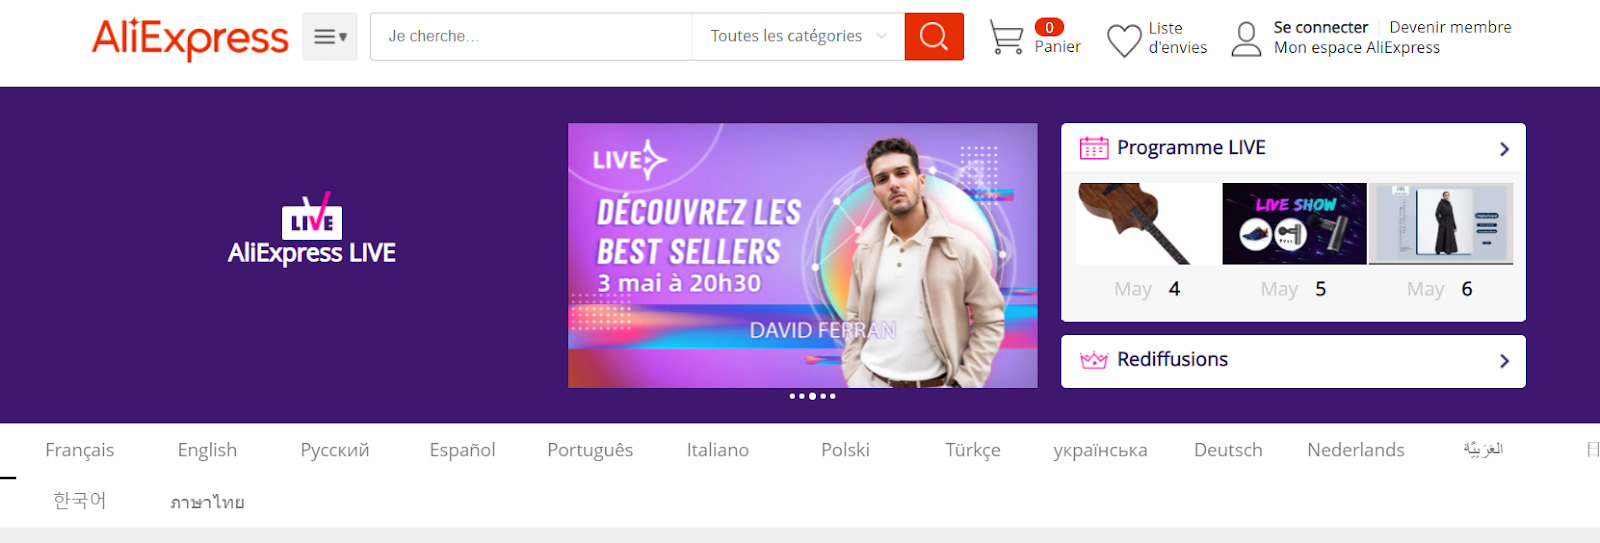 AliExpress Exemple Live Shopping